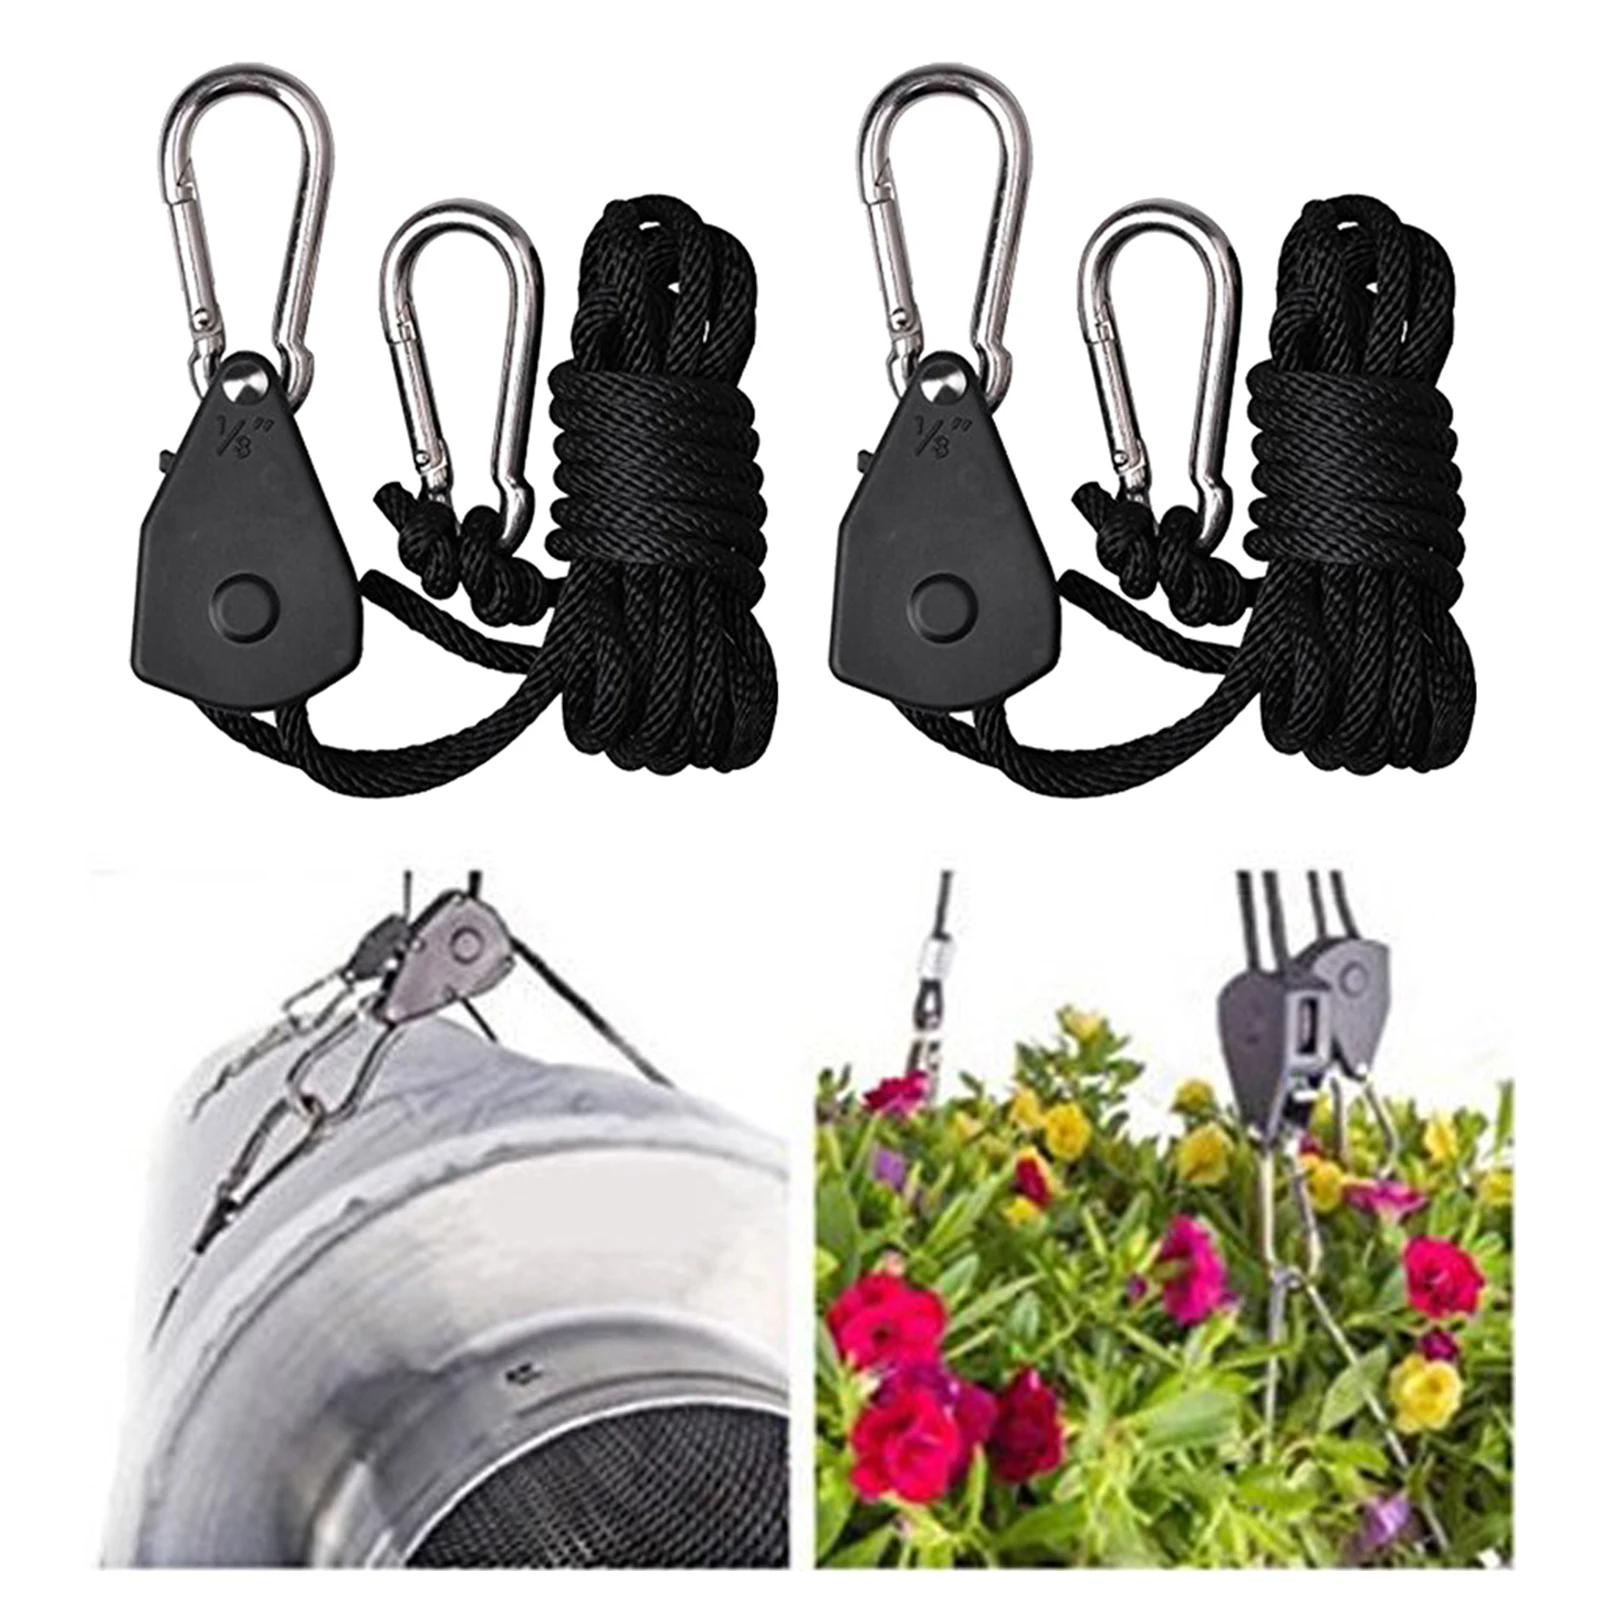 Details about   Heavy Duty Rope Hanger Ratchet Kayak Canoe Bow And Stern Tie Downs Strap 